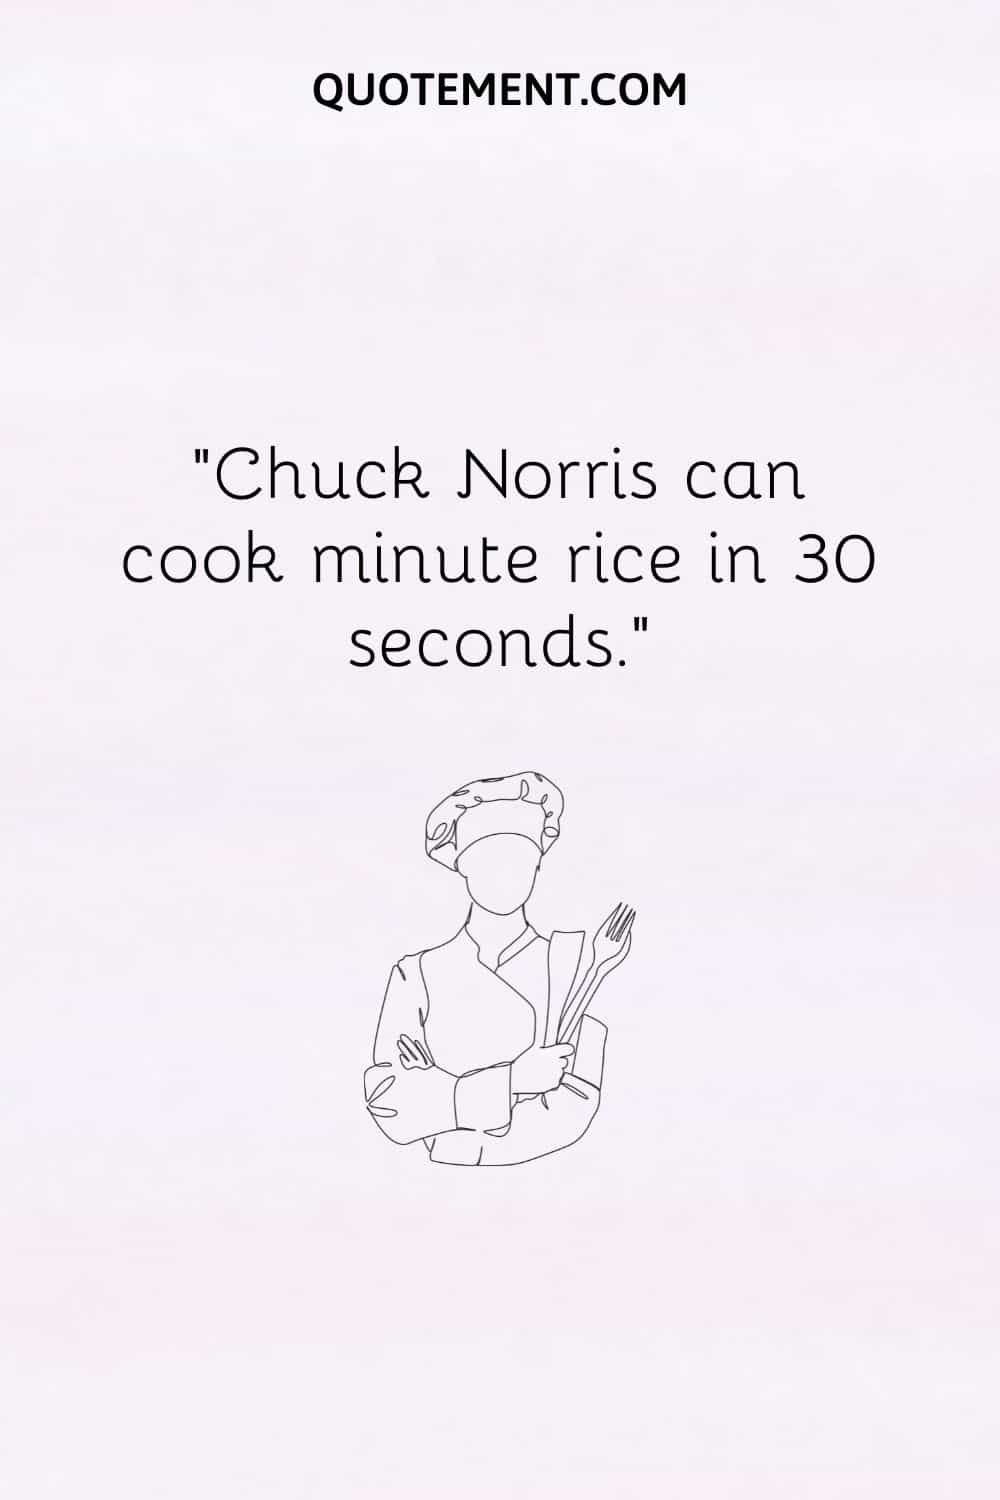 Chuck Norris can cook minute rice in 30 seconds